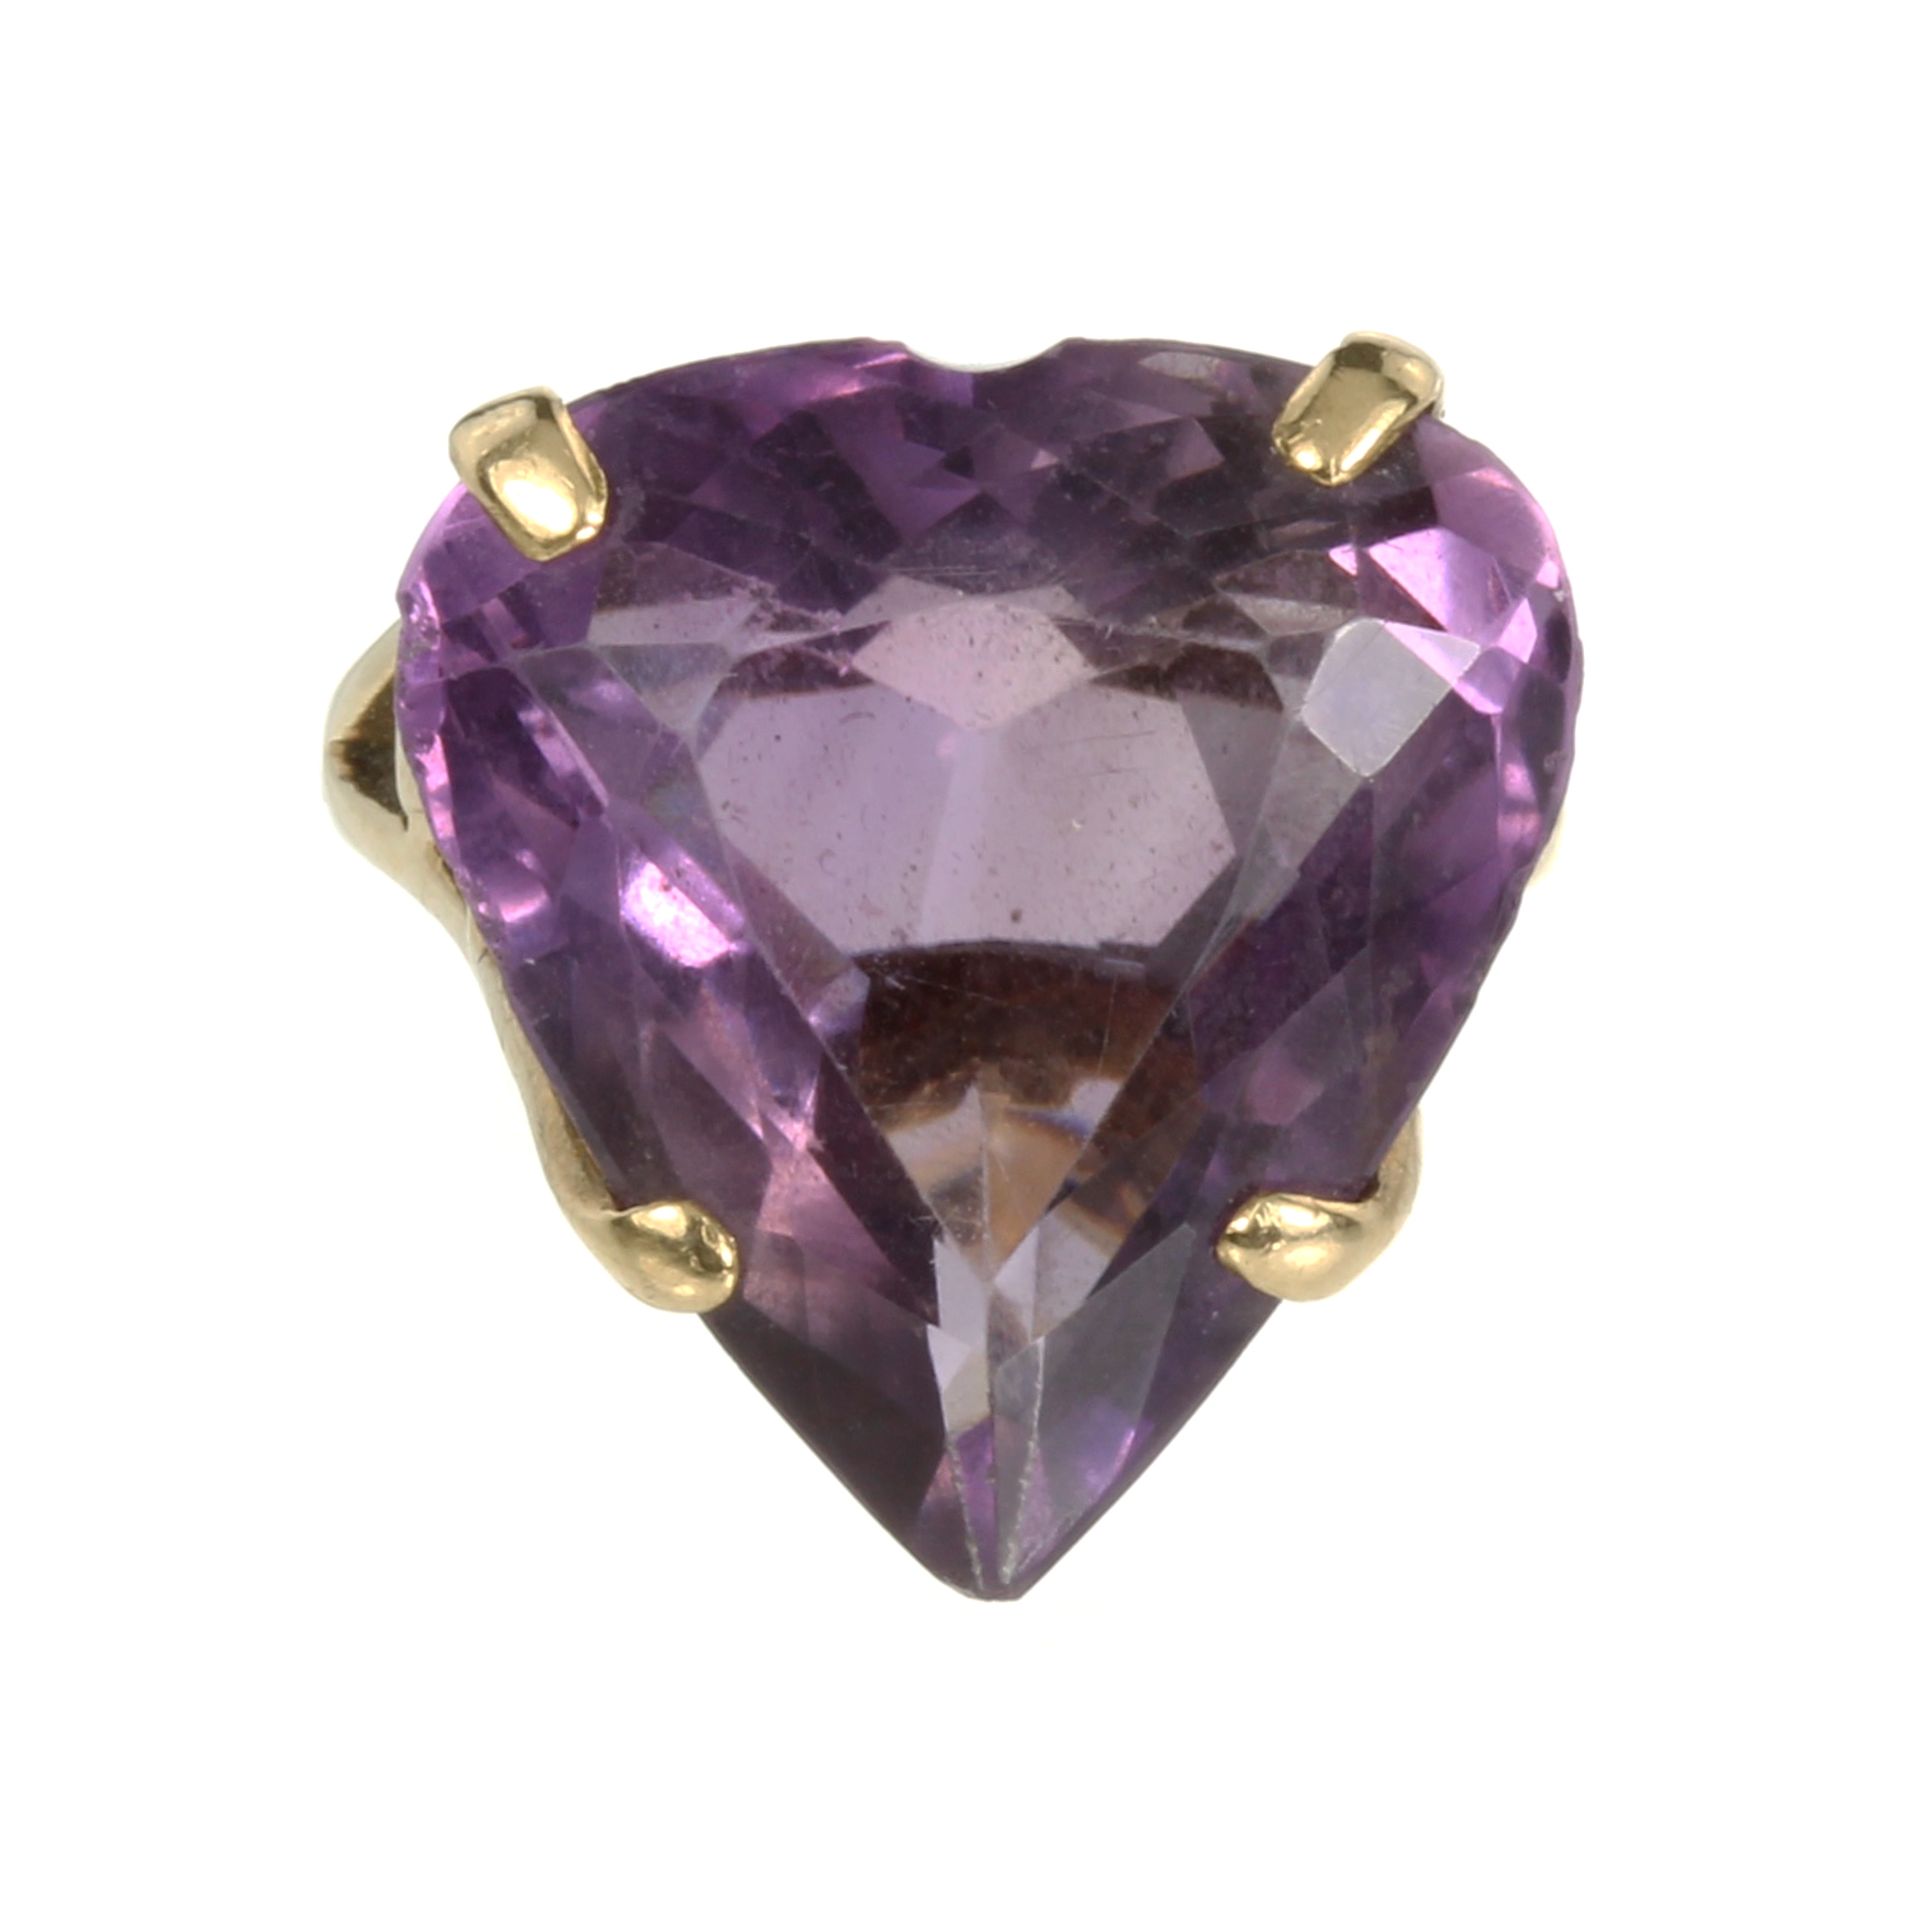 AN AMETHYST HEART DRESS RING set with a large heart cut amethyst in a galleried mount. Ring size